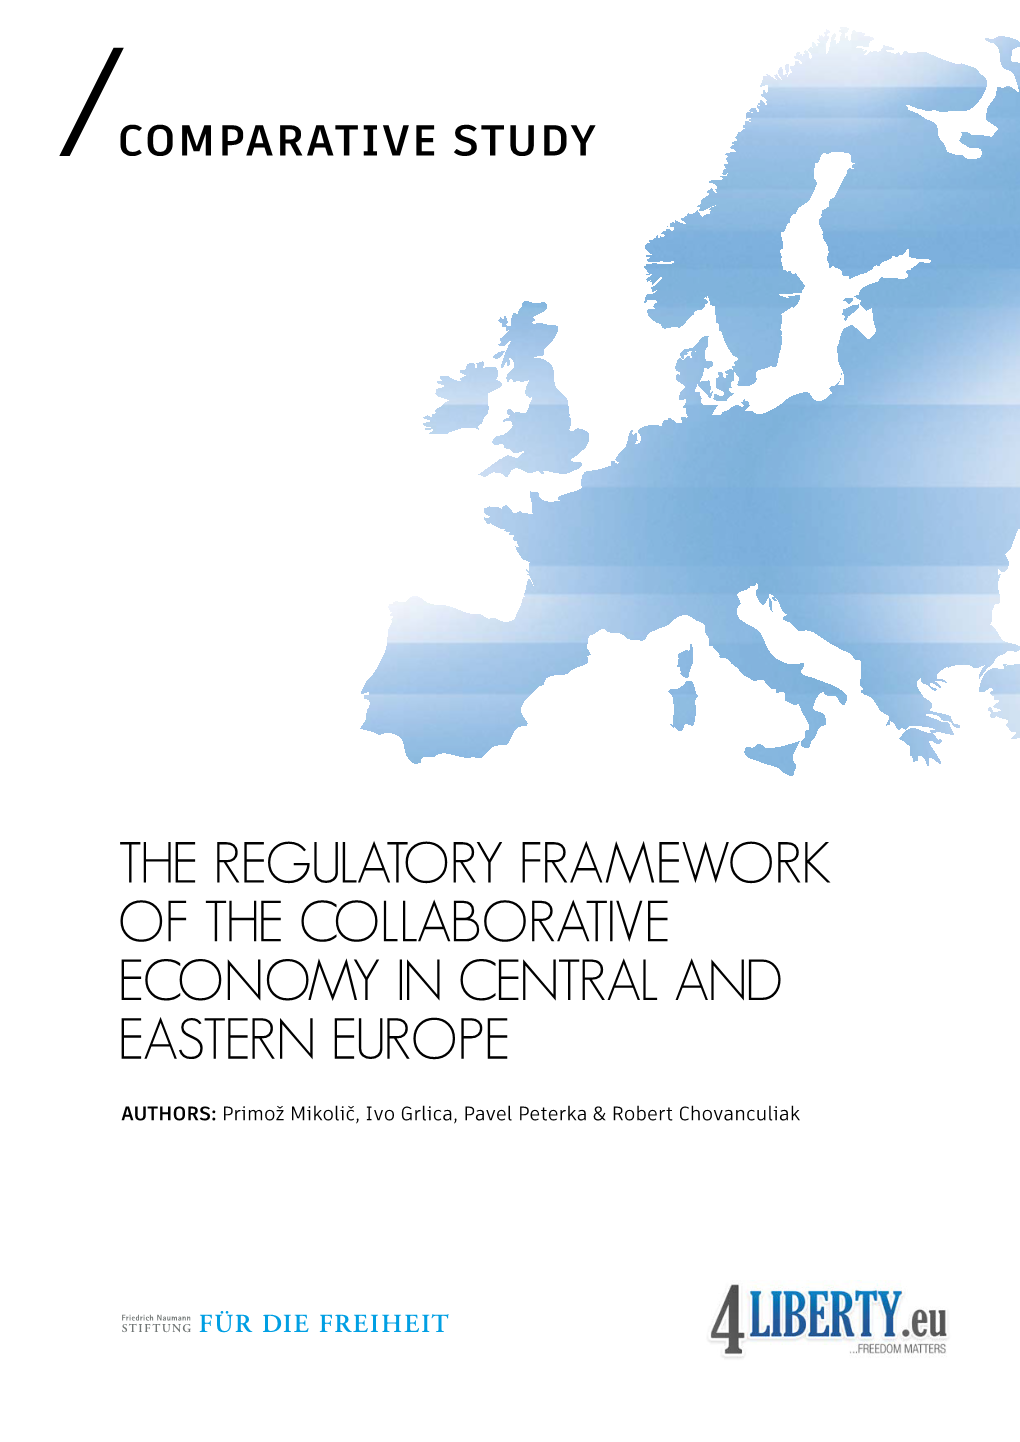 The Regulatory Framework of the Collaborative Economy in Central and Eastern Europe